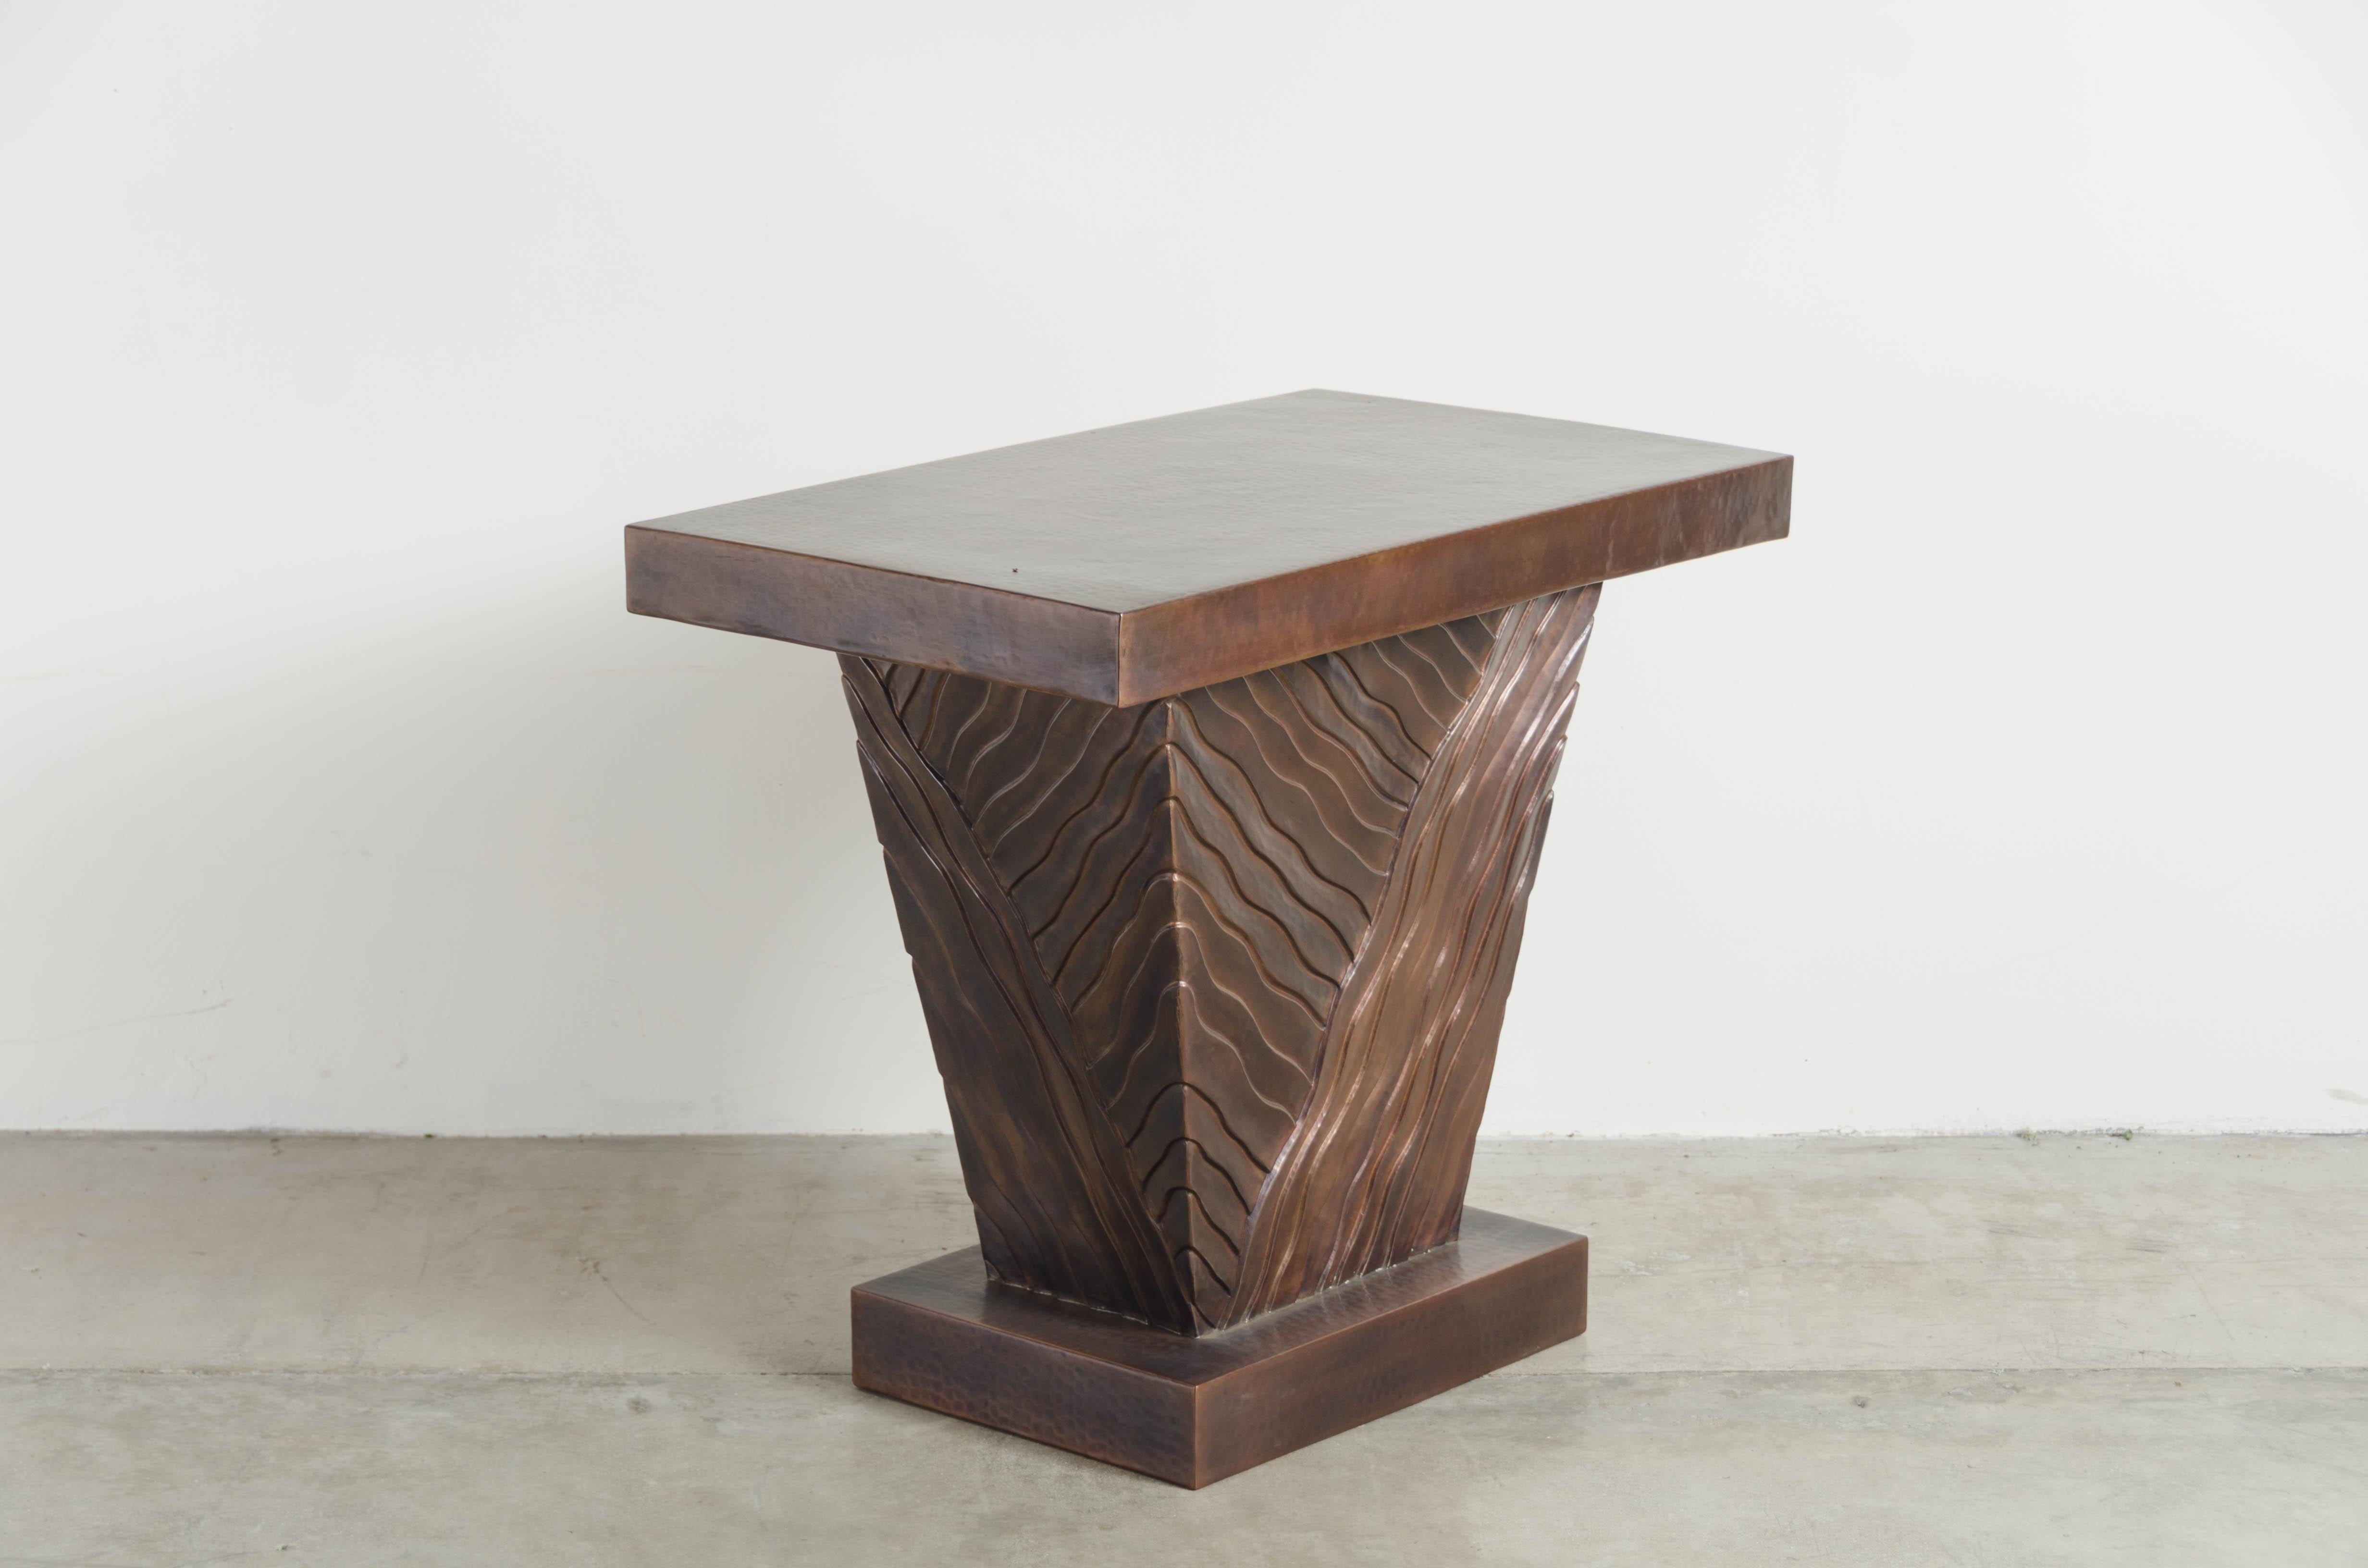 Diagonal Cascade design side table
Antique copper
Hand repousse
Limited edition
Each piece is individually crafted and is unique.

Repousse´ is the traditional art of hand-hammering decorative relief onto sheet metal. The technique originated